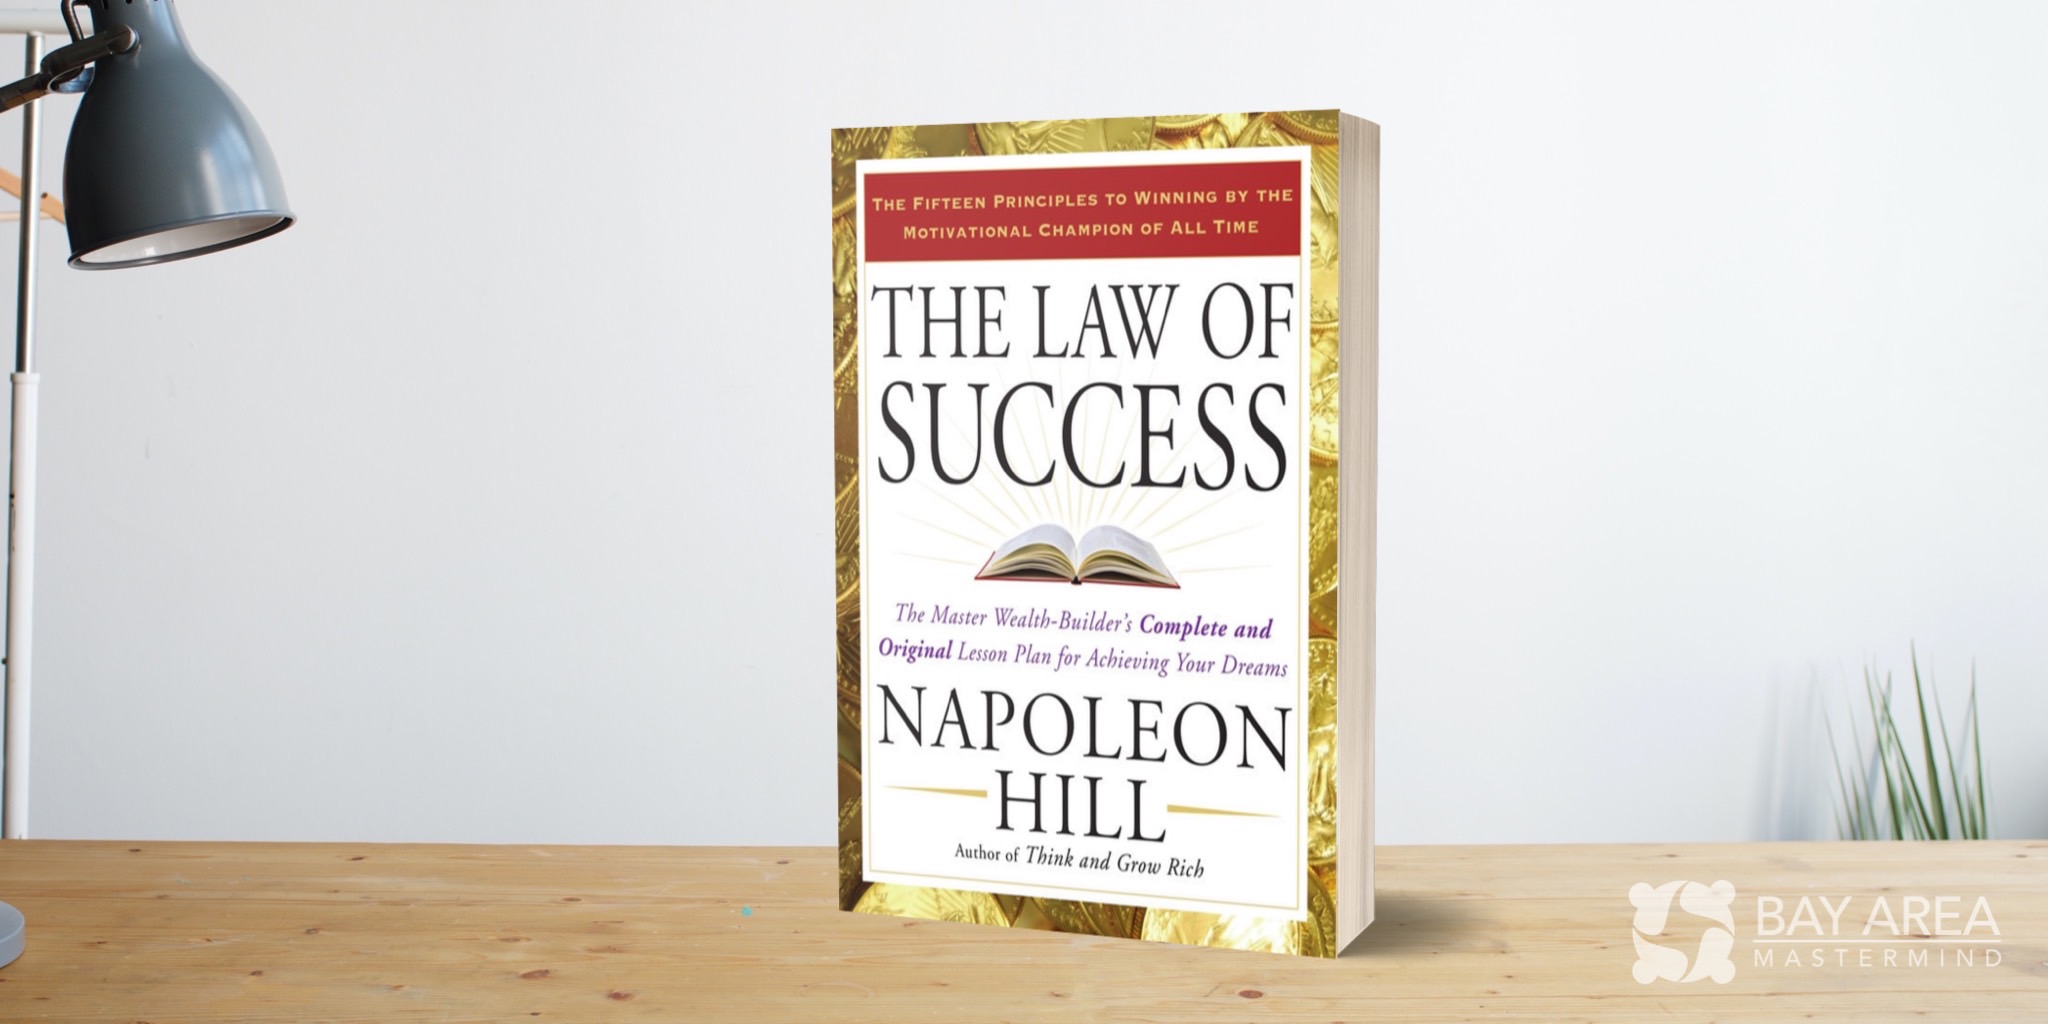 The Law of Success: The Master Wealth-Builder's Complete and Original Lesson Plan for Achieving Your Dreams by Author Napoleon Hill